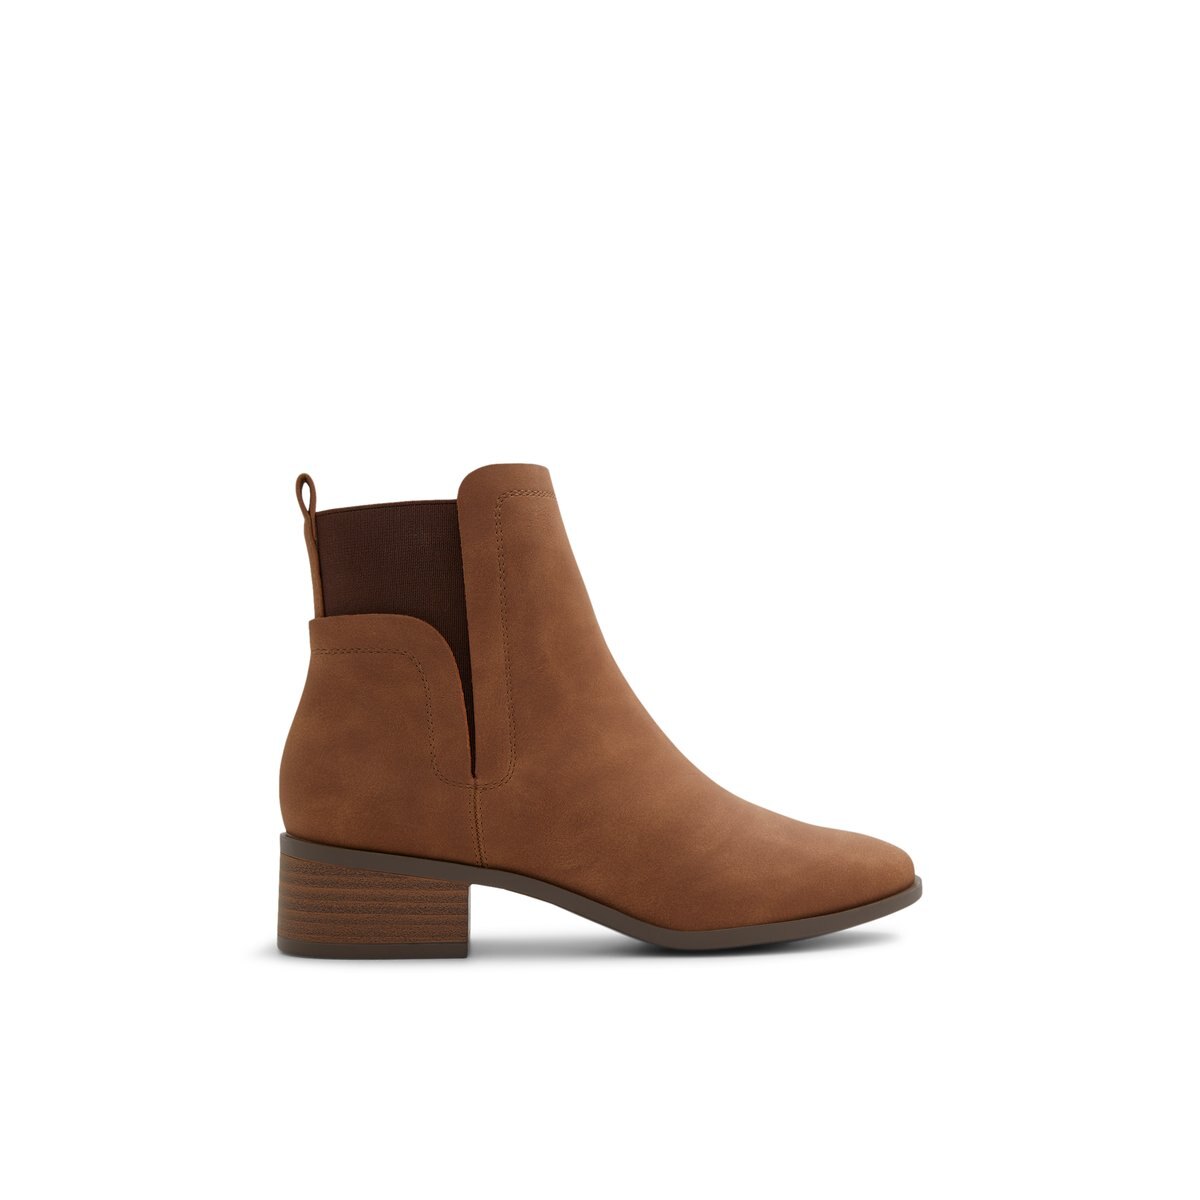 Cassi Cognac Women's Ankle Boots | Call It Spring Canada